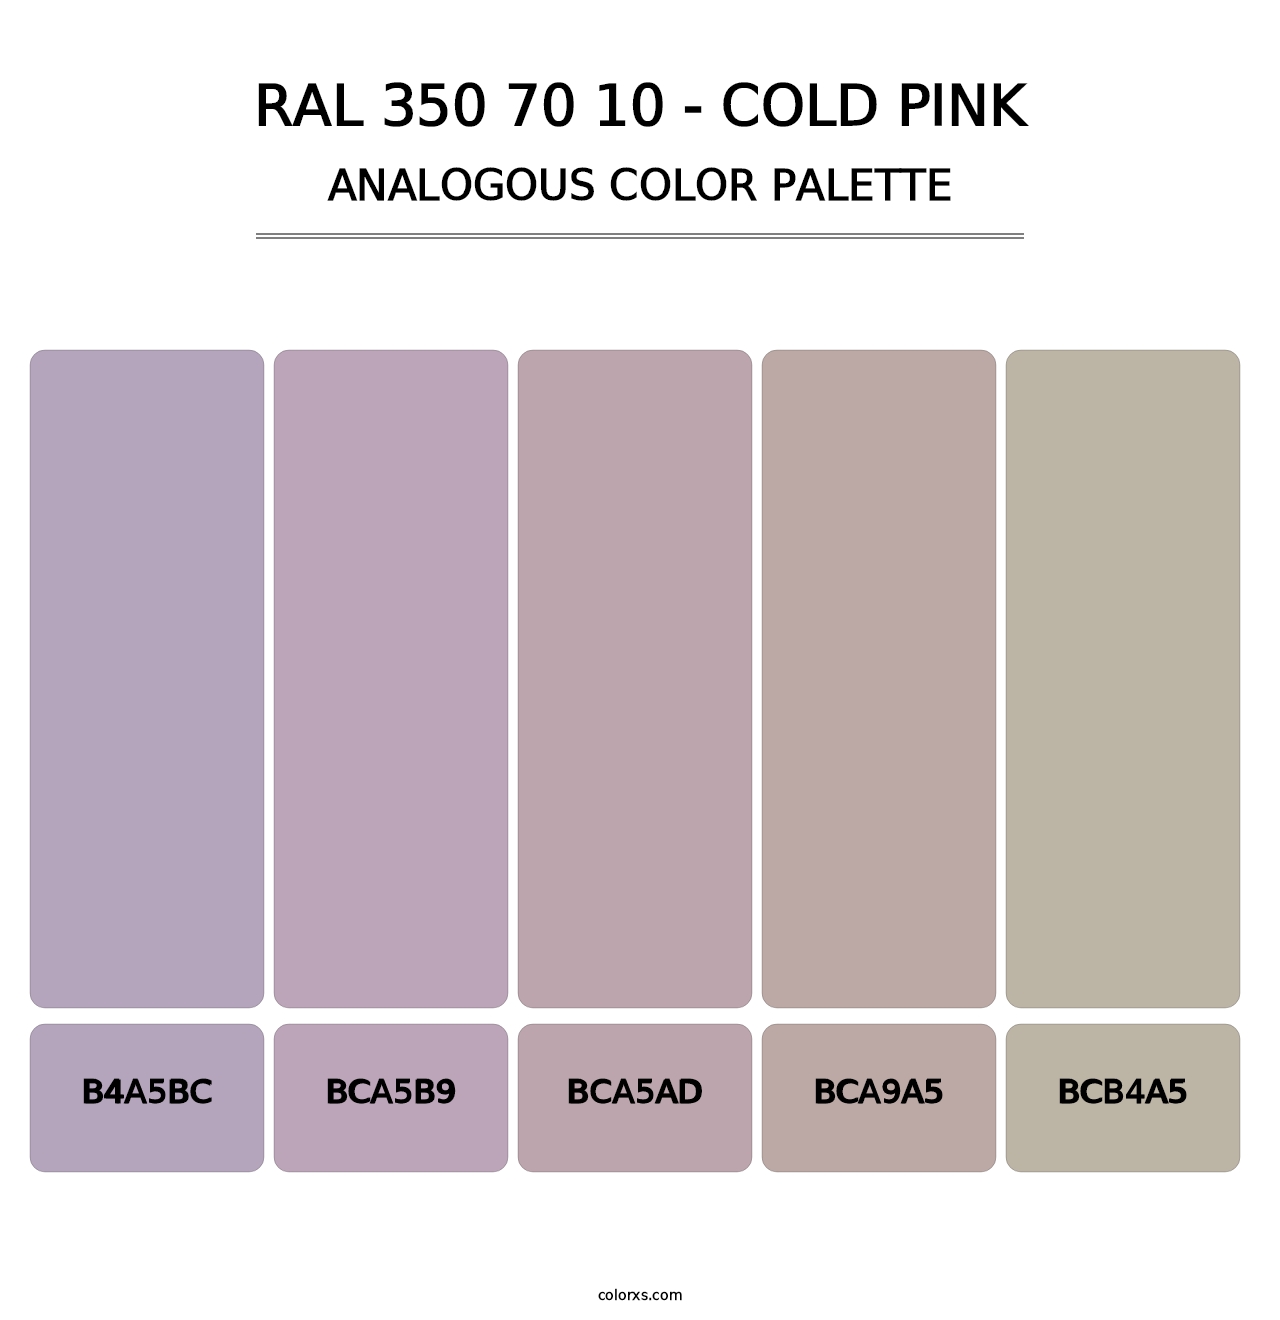 RAL 350 70 10 - Cold Pink - Analogous Color Palette